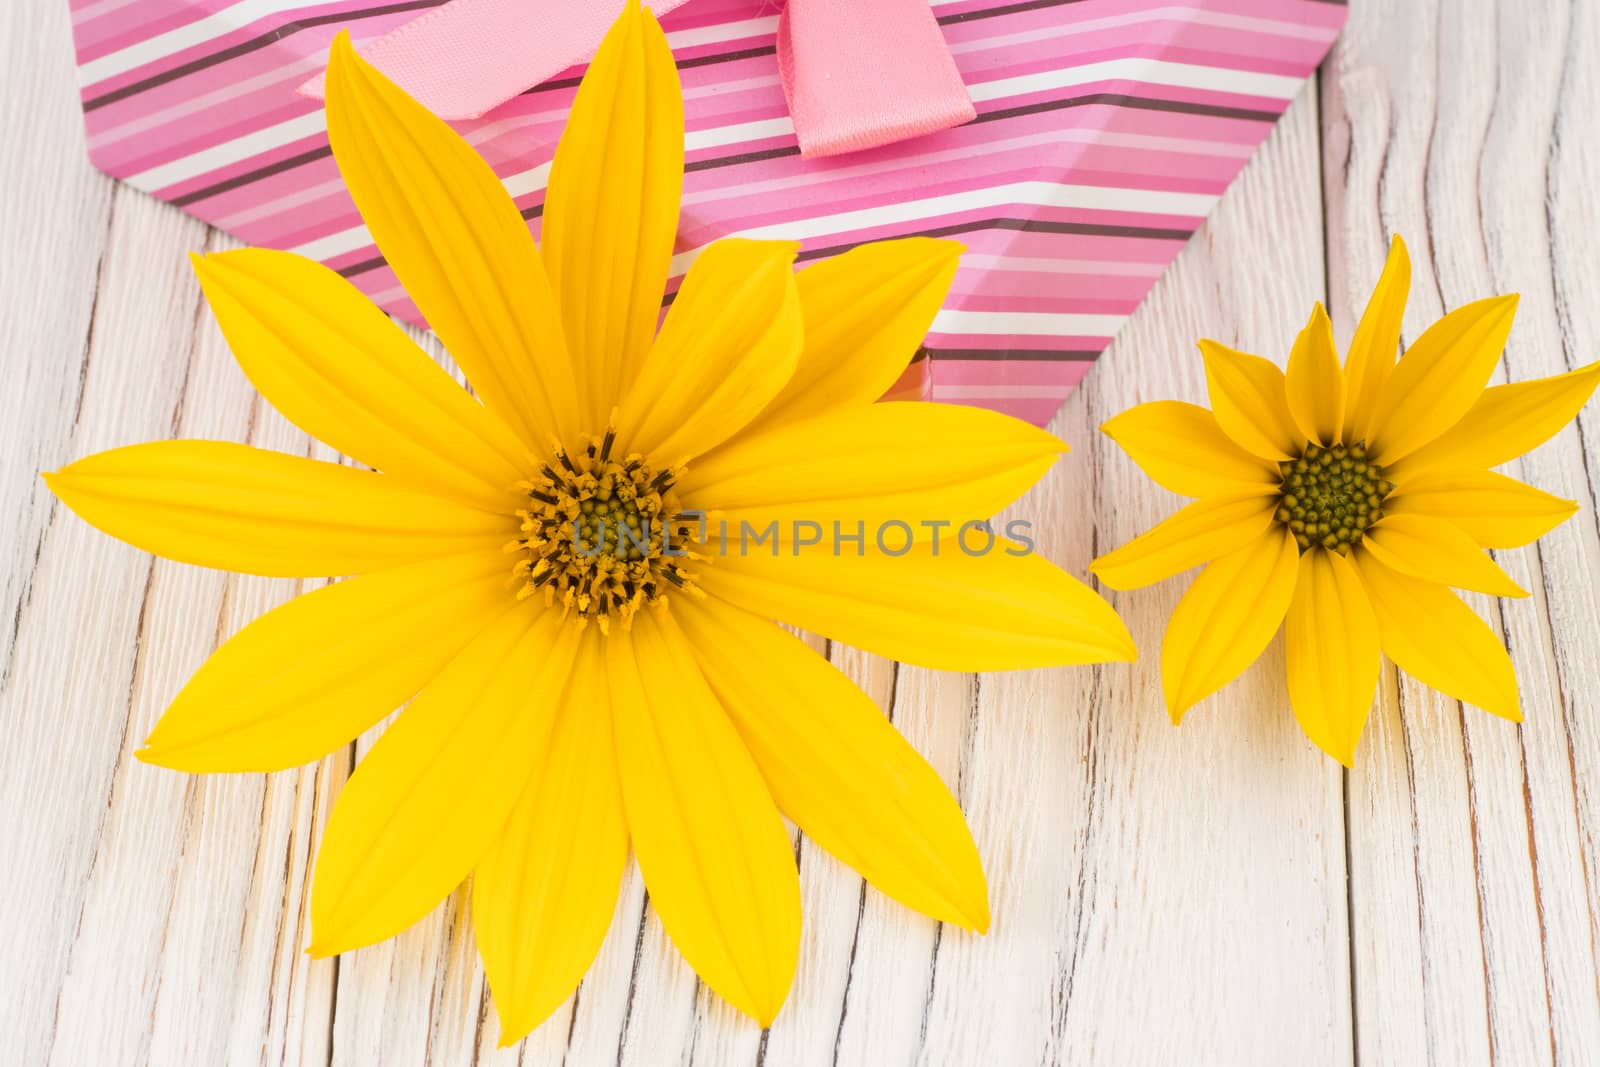 Wild flowers in a watering can with a gift box on a wooden table by DGolbay